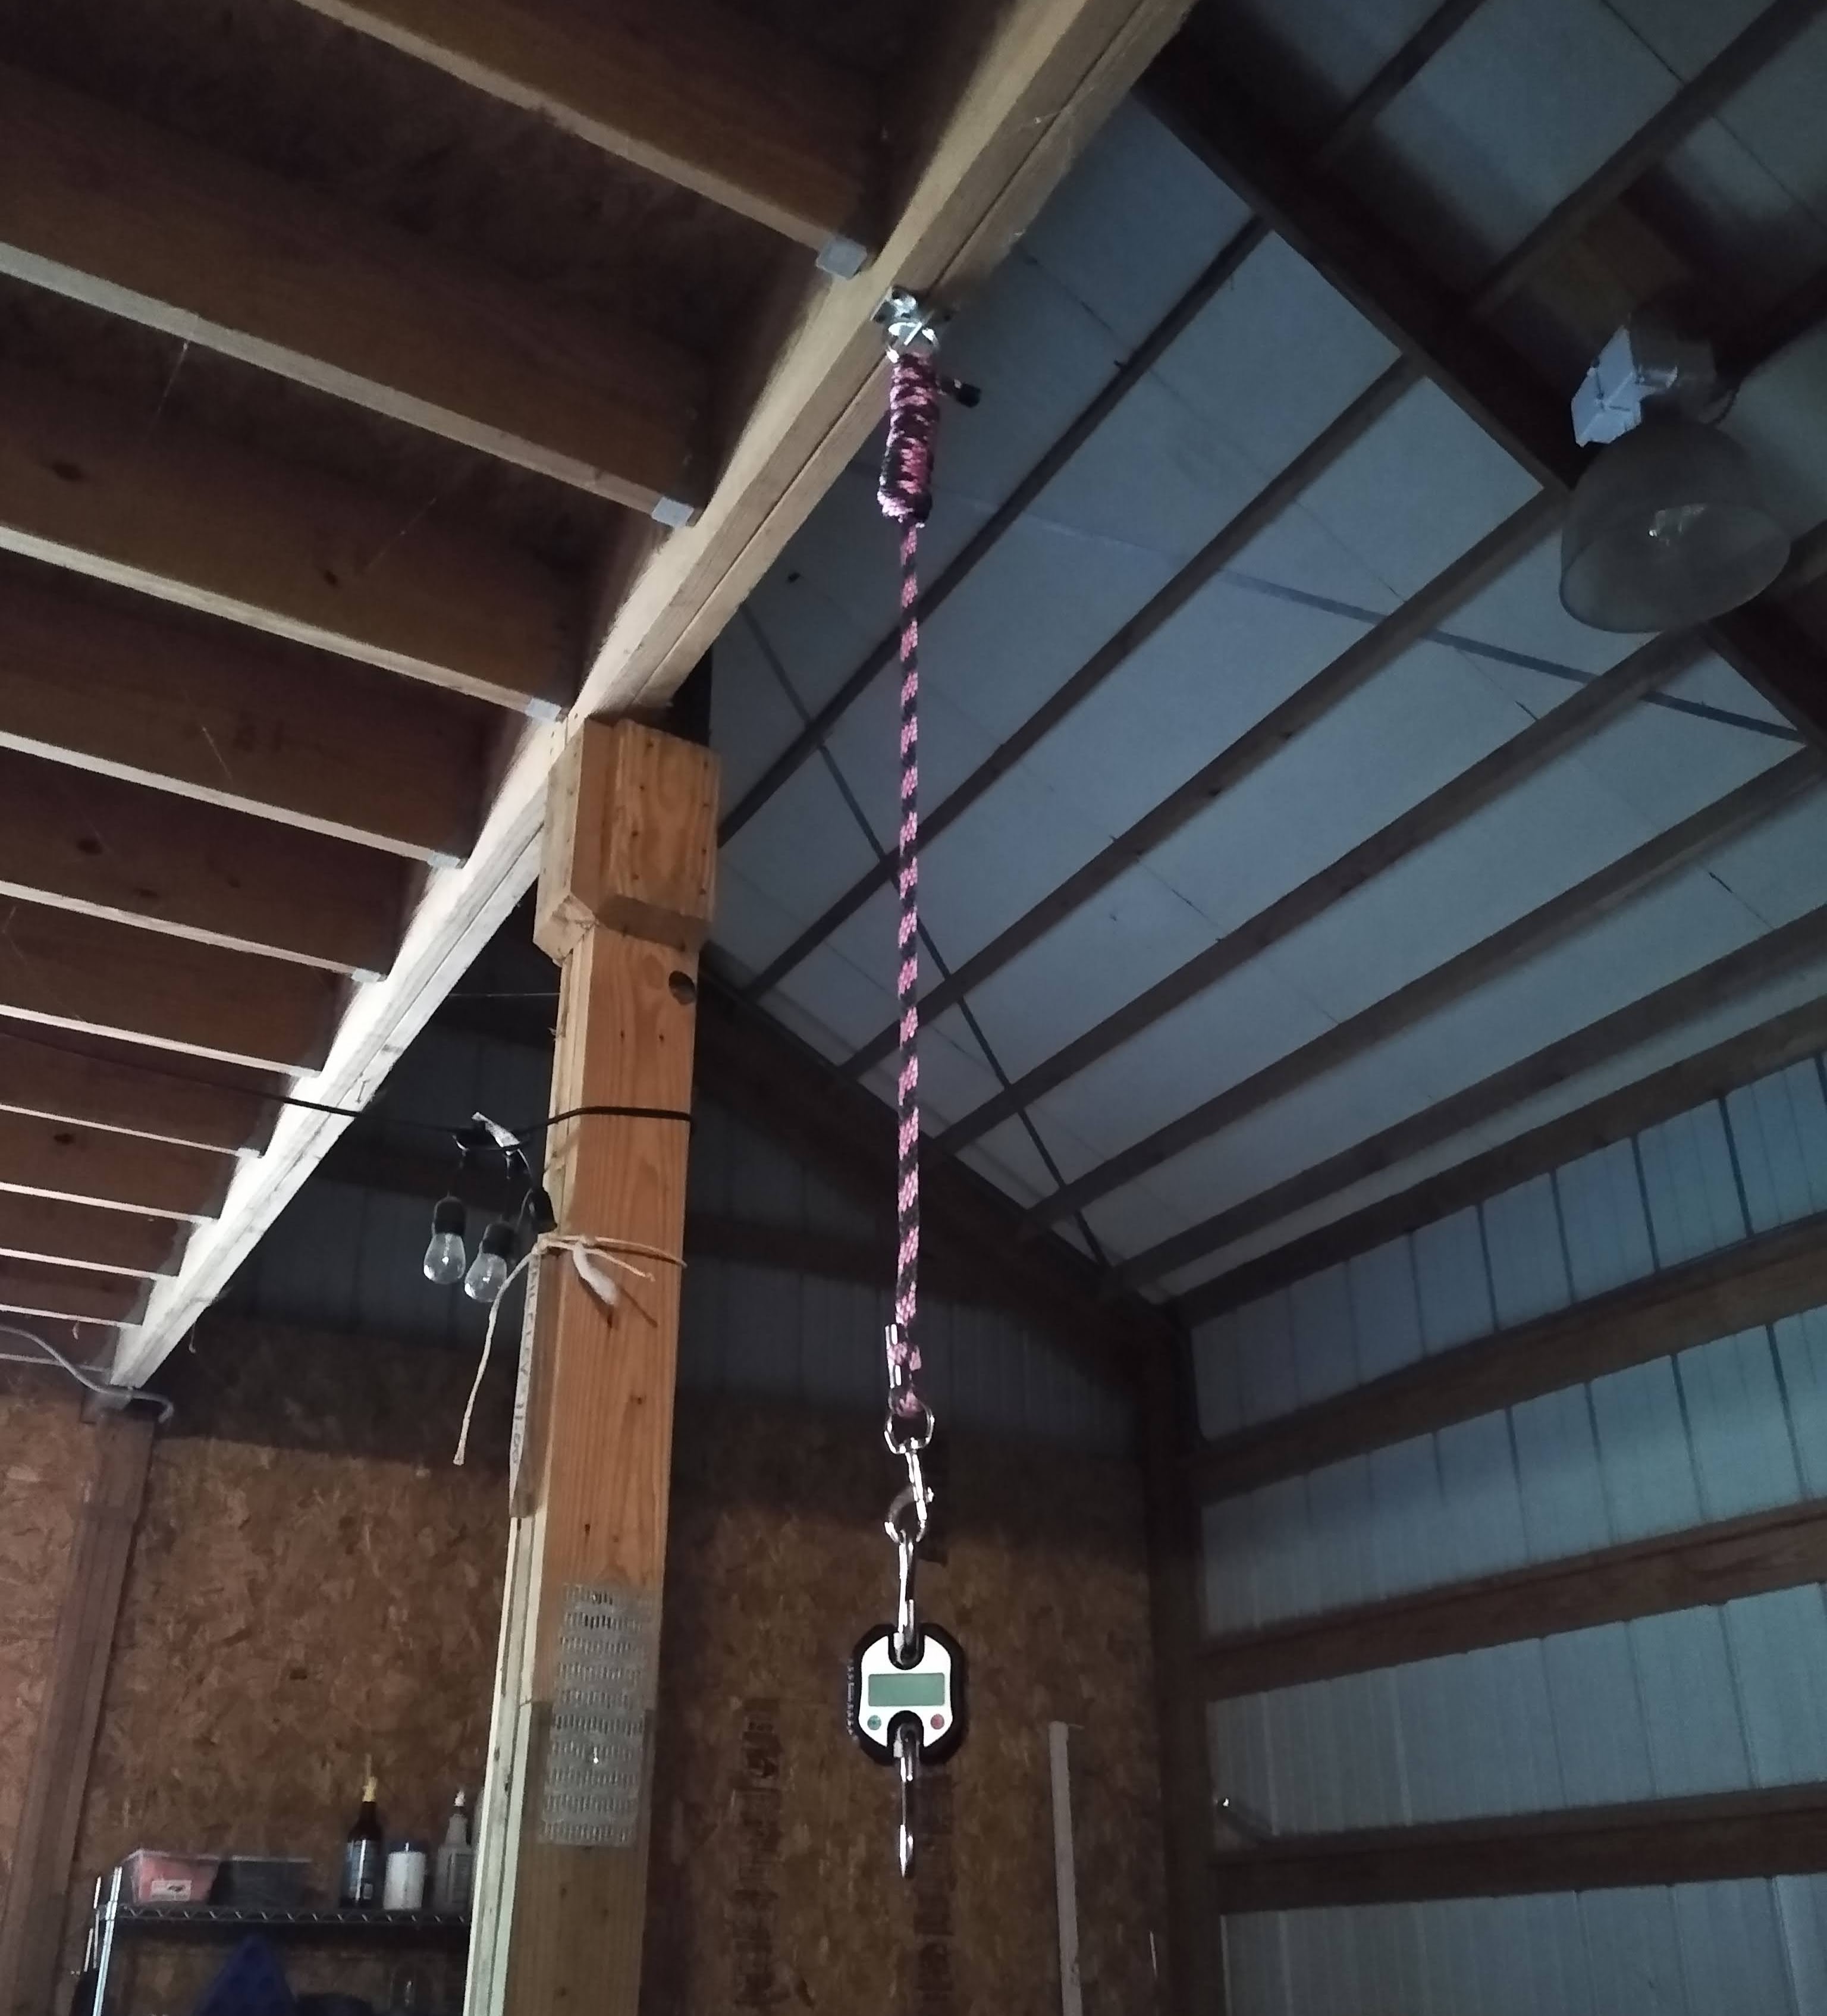 A horse hay scale in a barn hanging from a wooden rafter.